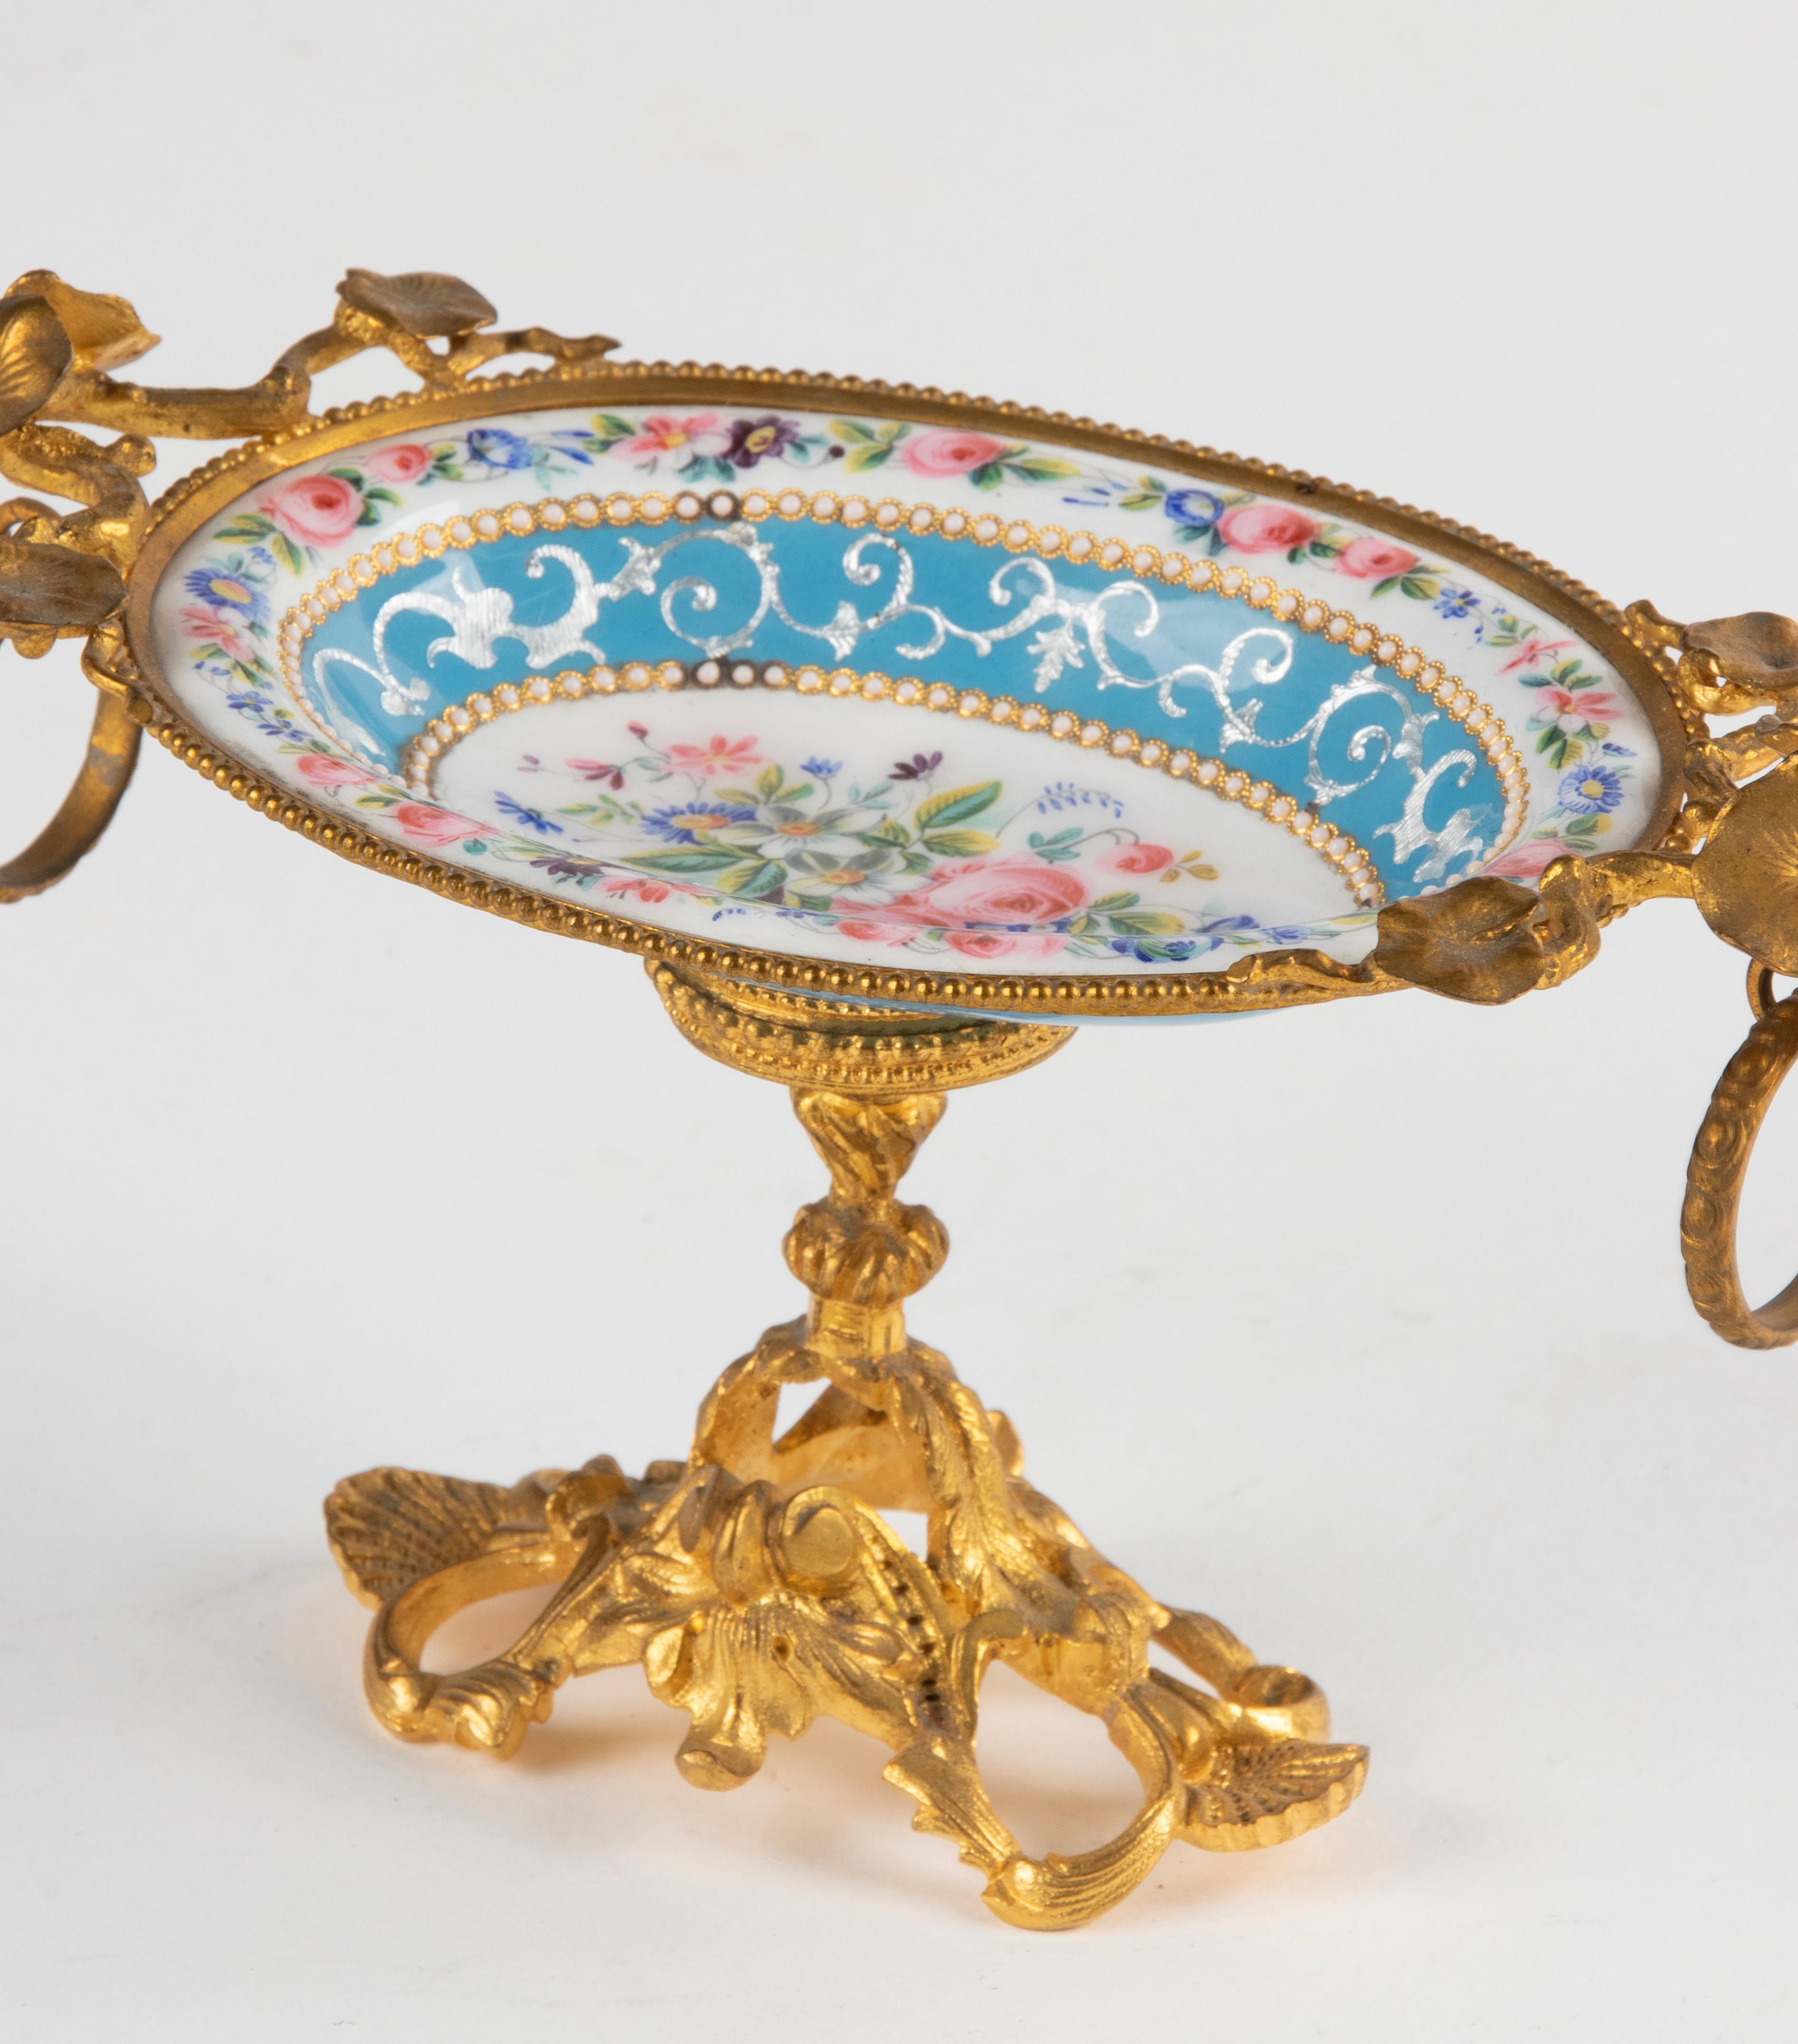 19th Century Small Dish Hand Painted Enamel and Ormolu Bronze In Good Condition For Sale In Casteren, Noord-Brabant